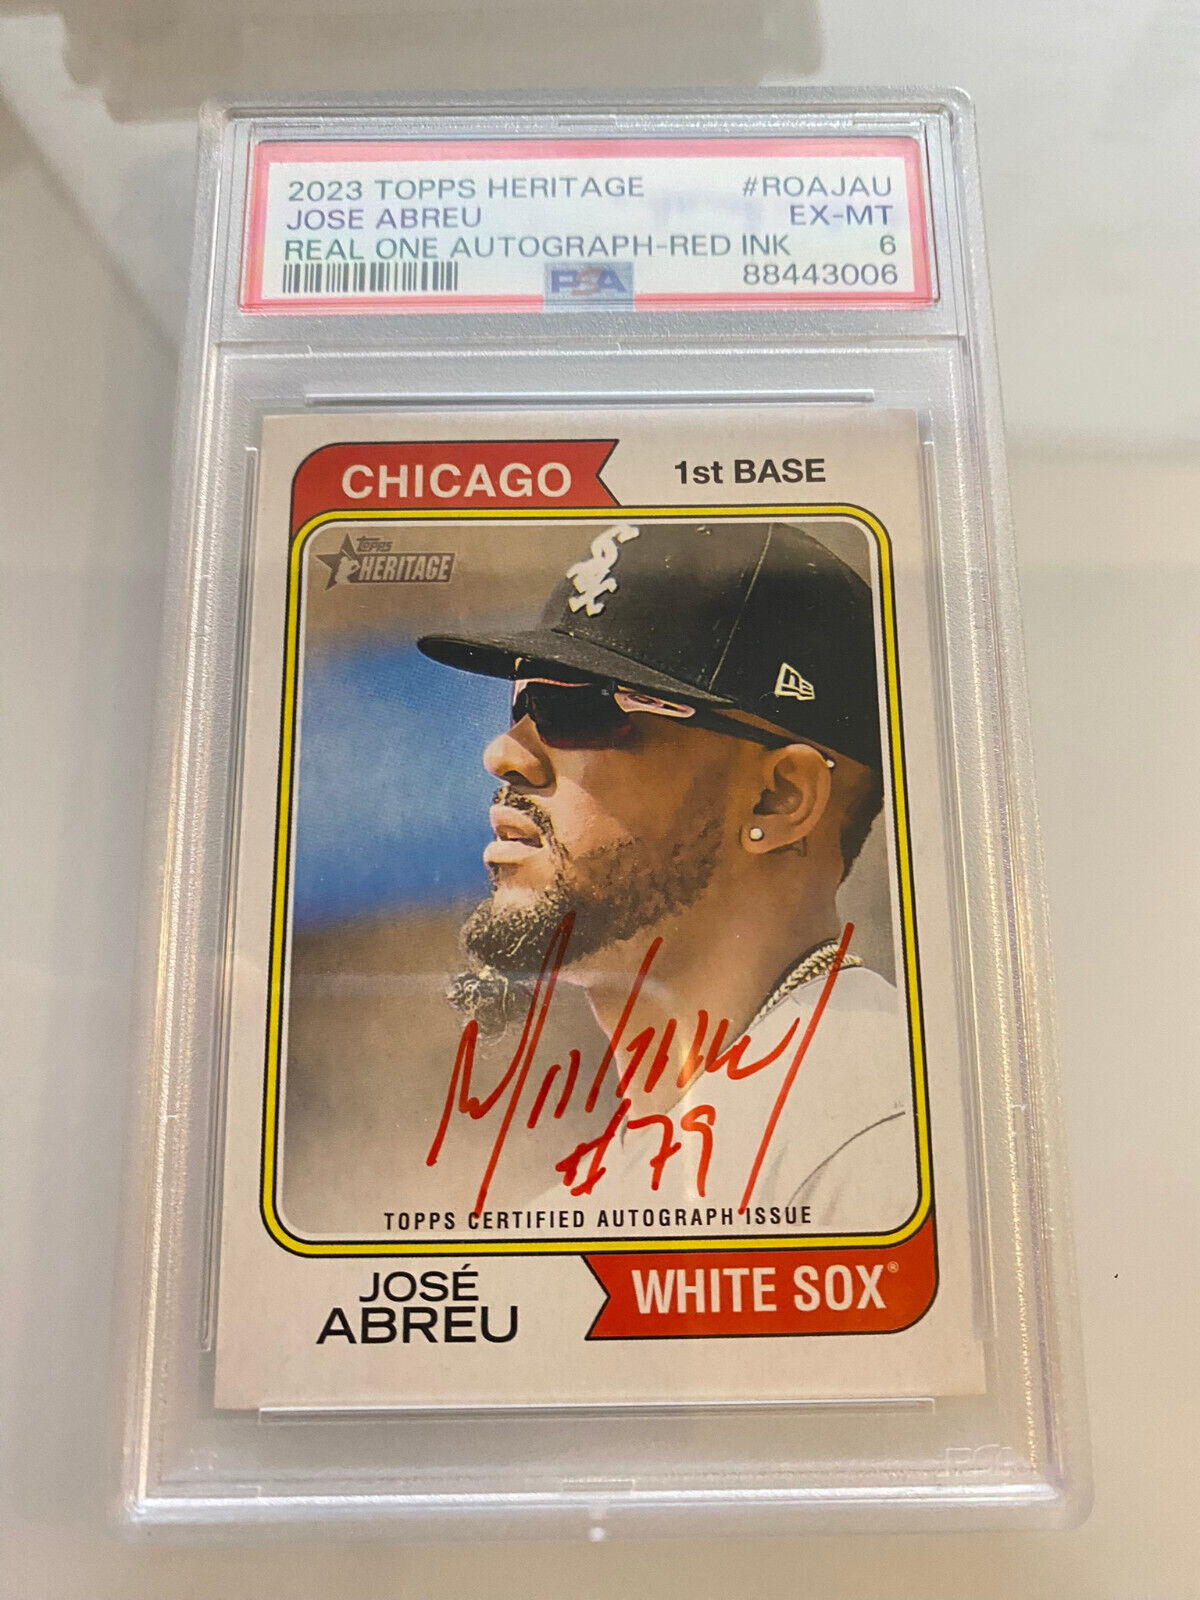 2023 TOPPS HERITAGE REAL ONE AUTO ROAJAU JOSE ABREU RED INK /74 WHITE SOX PSA 6